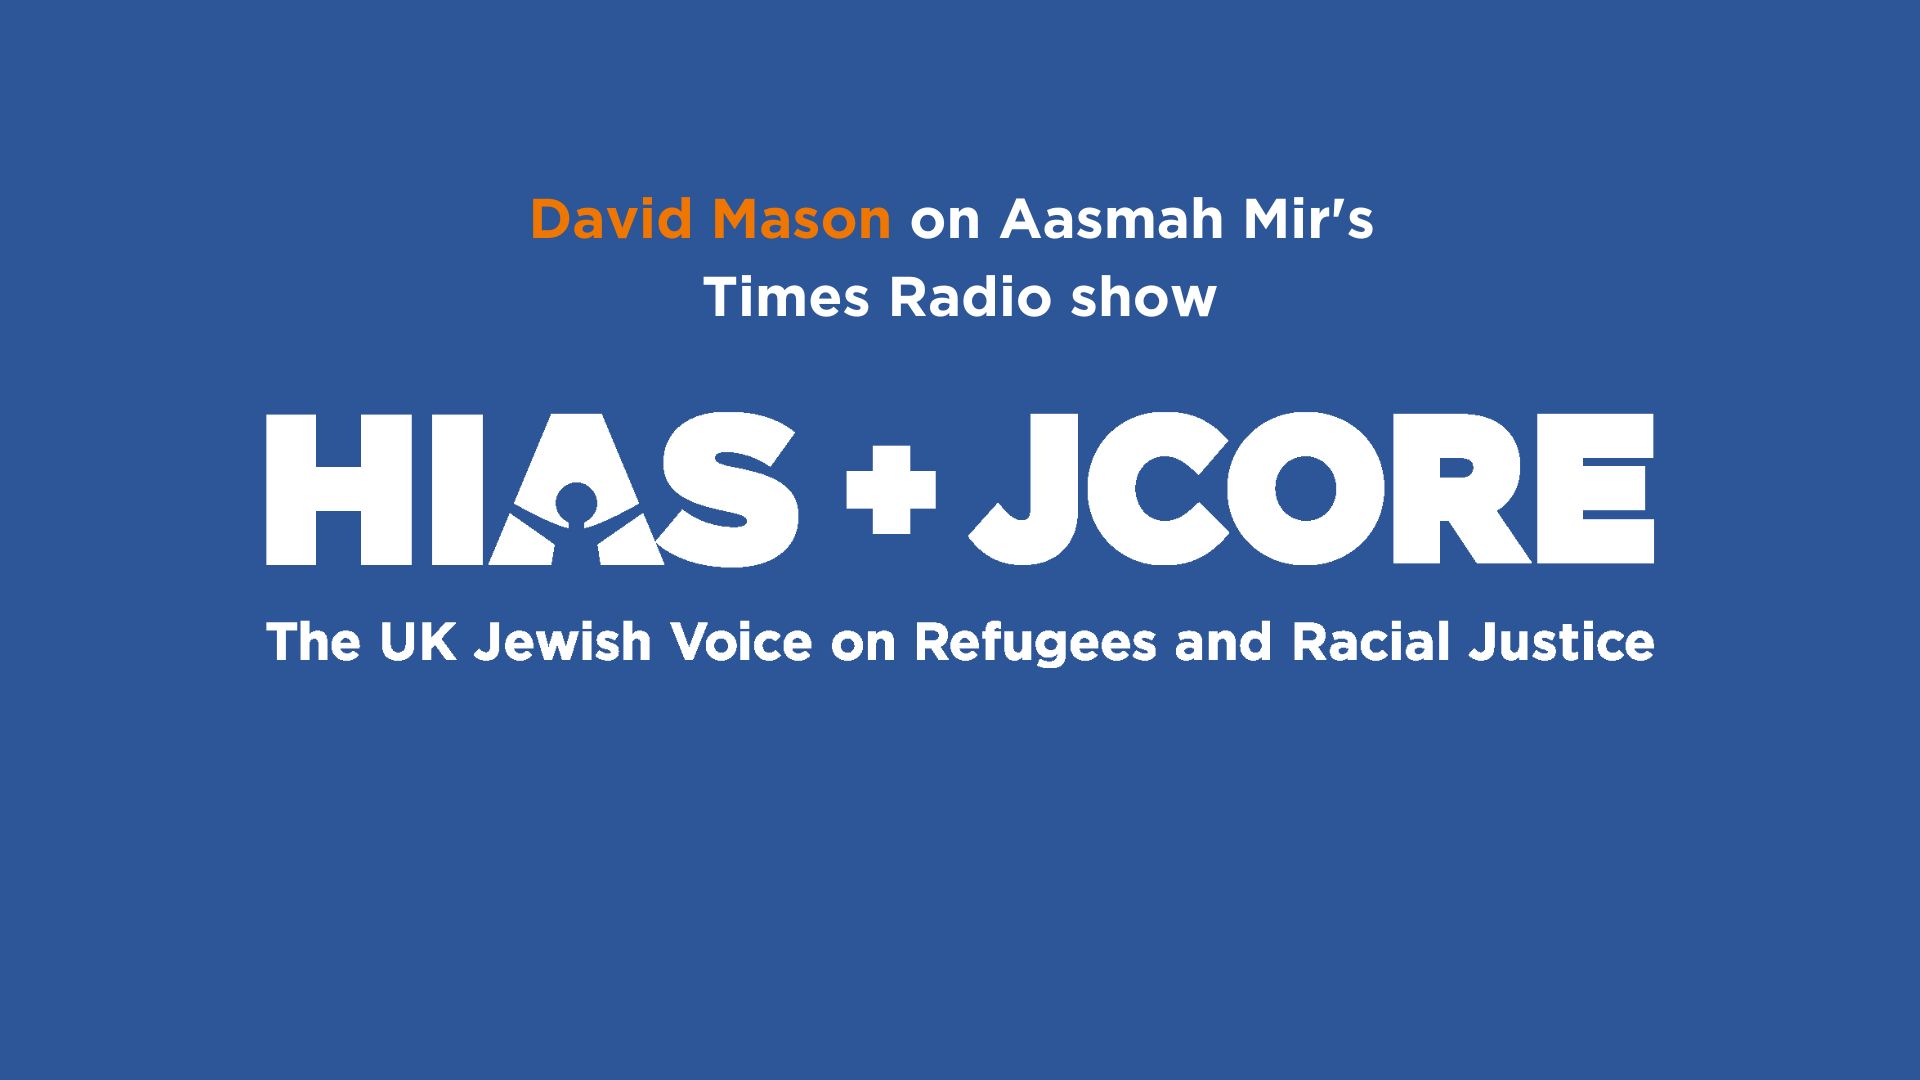 David Mason discusses the shocking rise in recorded antisemitic incidents